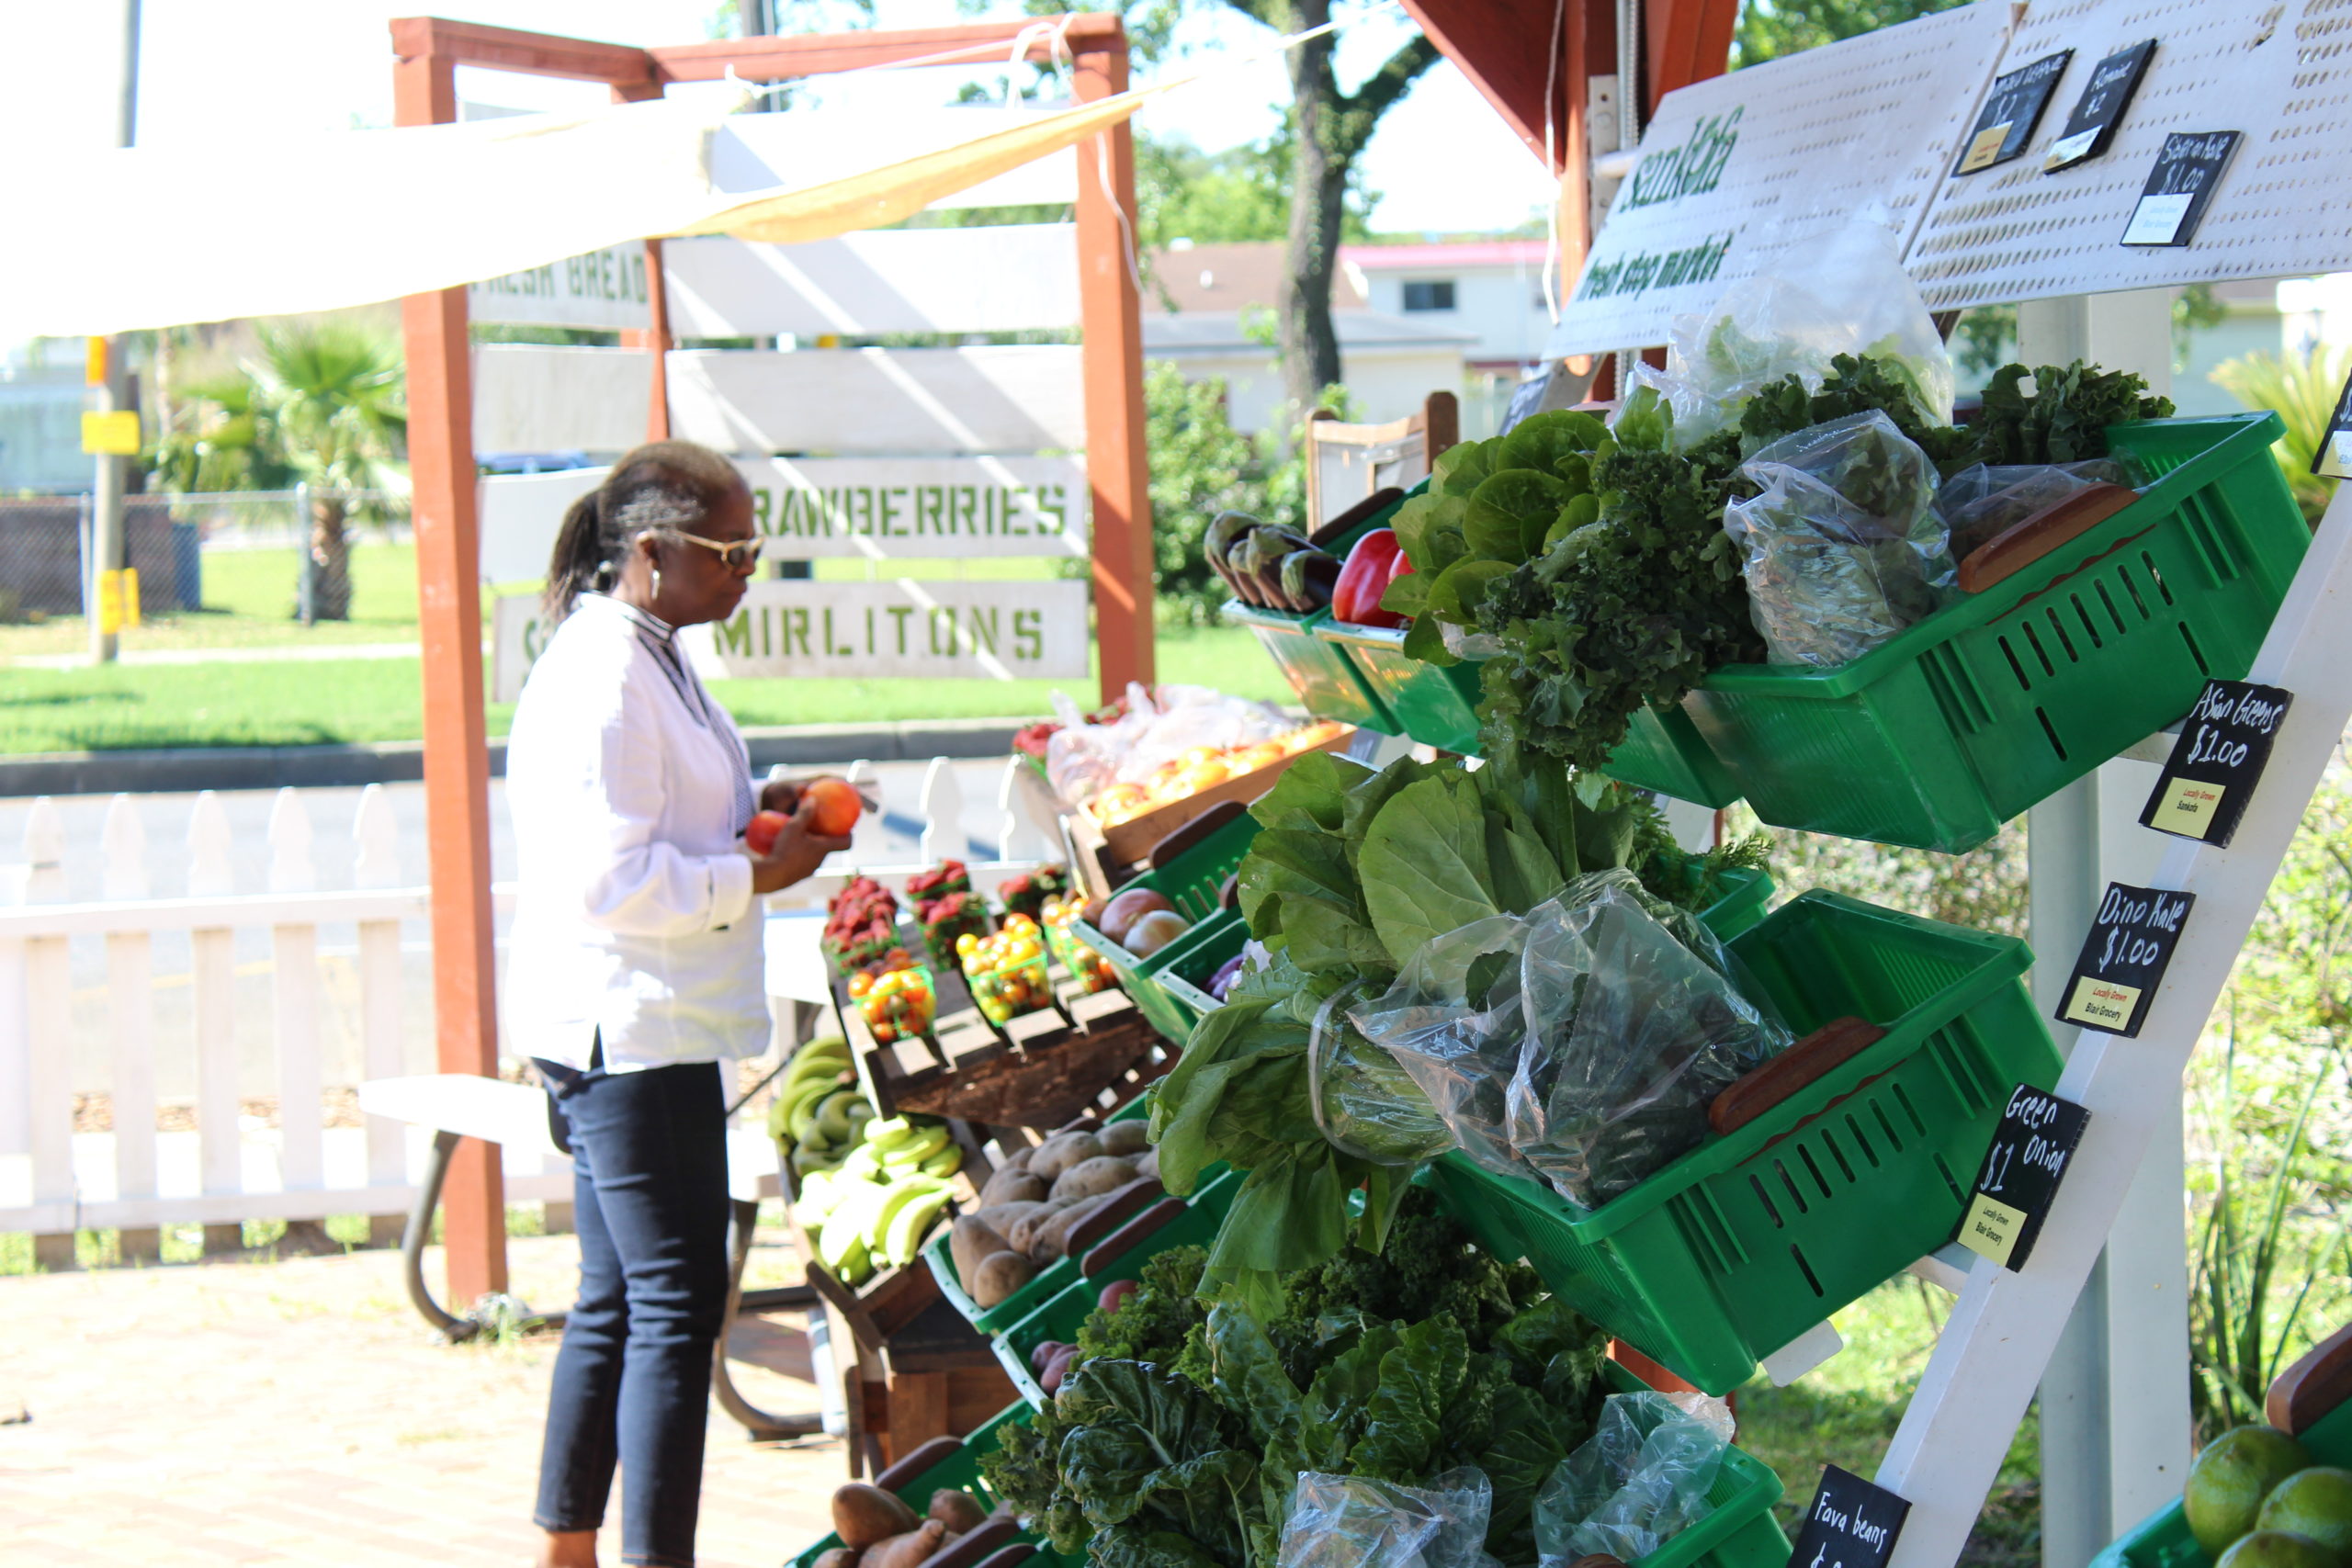 Elaine Proctor, a resident of the Lower Ninth Ward, shops at the Fresh Stop Market that Sankofa runs on Claude Avenue. (Photo: Courtesy of Sankofa CDC)